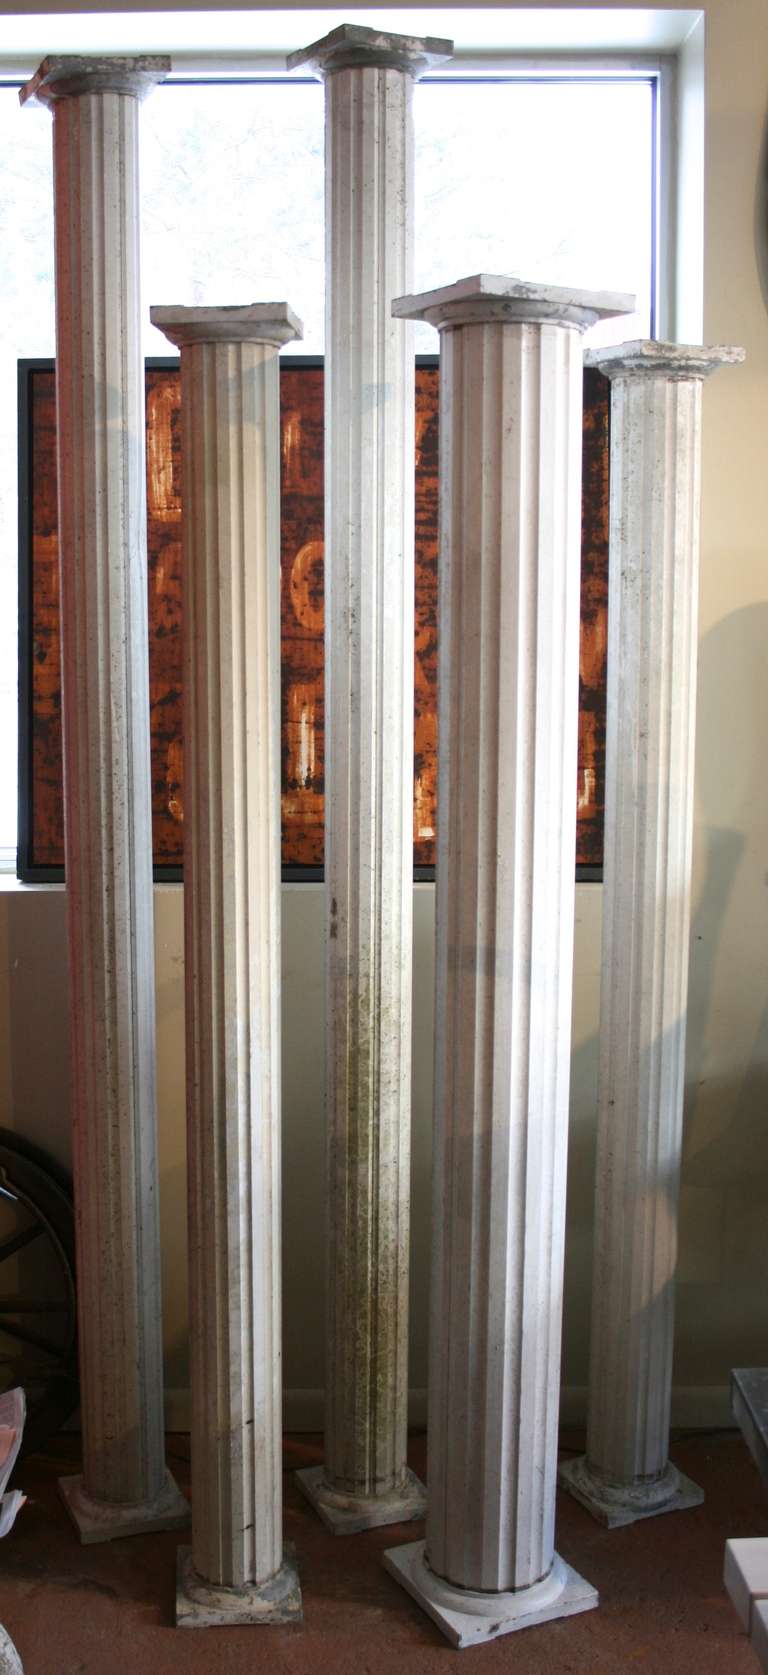 Group of five painted zinc columns, aged patina